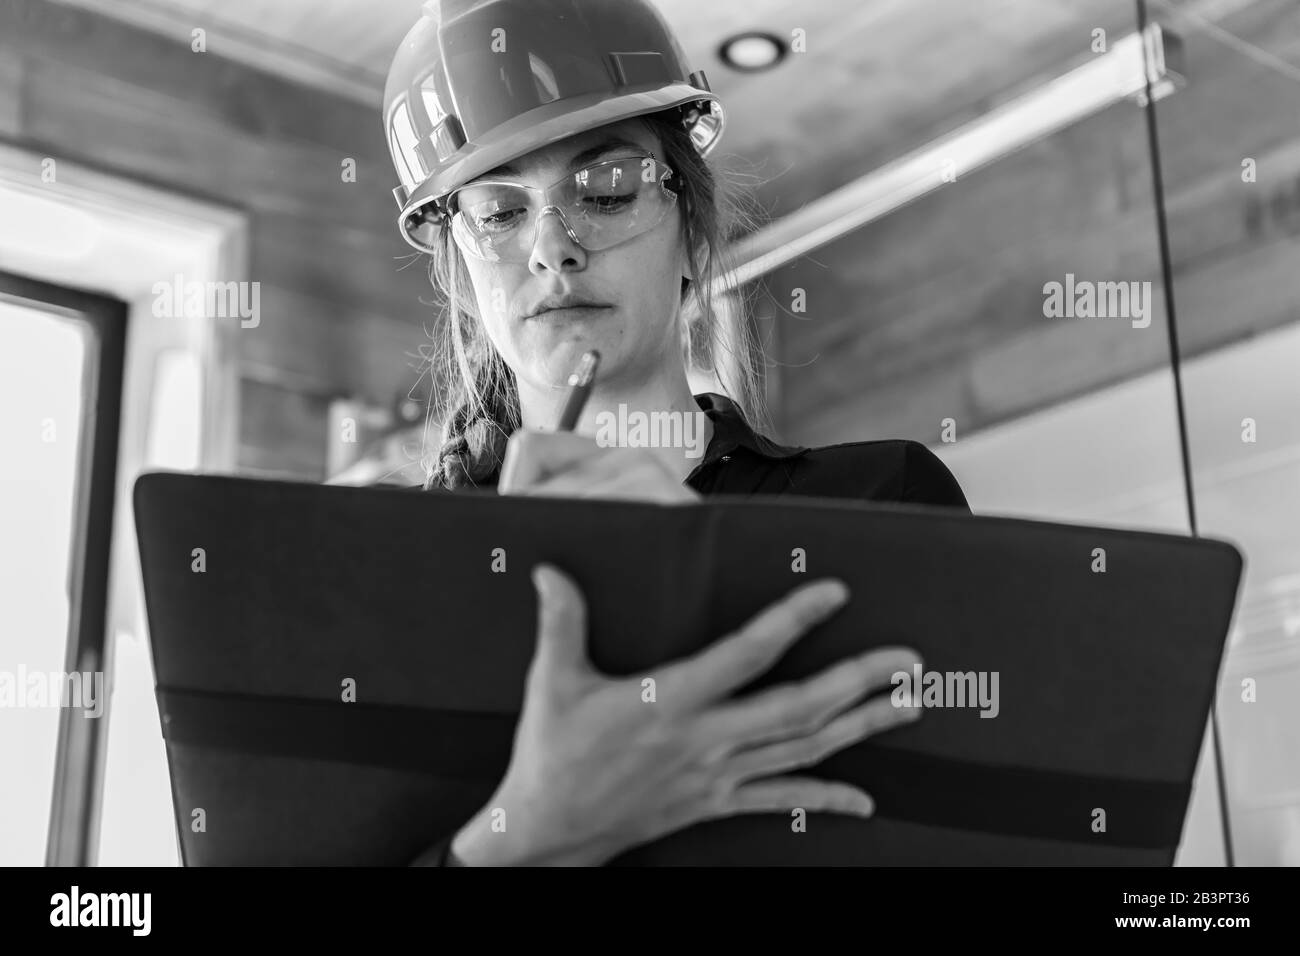 black and white low angle portrait of a woman holding a clipboard as she taking notes, writing reviews and reports. she wears construction hard hat. Stock Photo